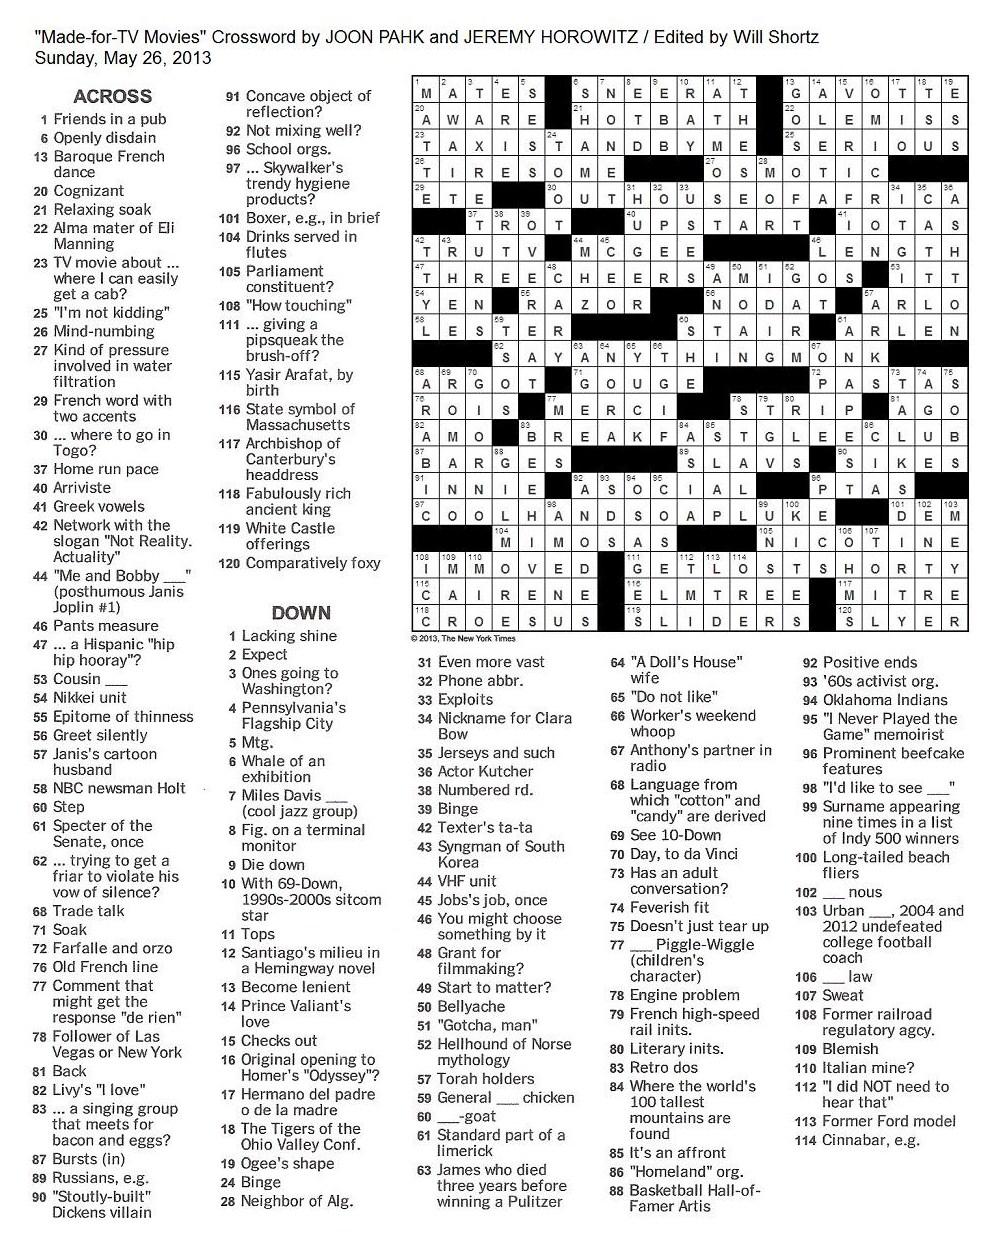 the-new-york-times-crossword-in-gothic-05-26-13-tv-movie-about